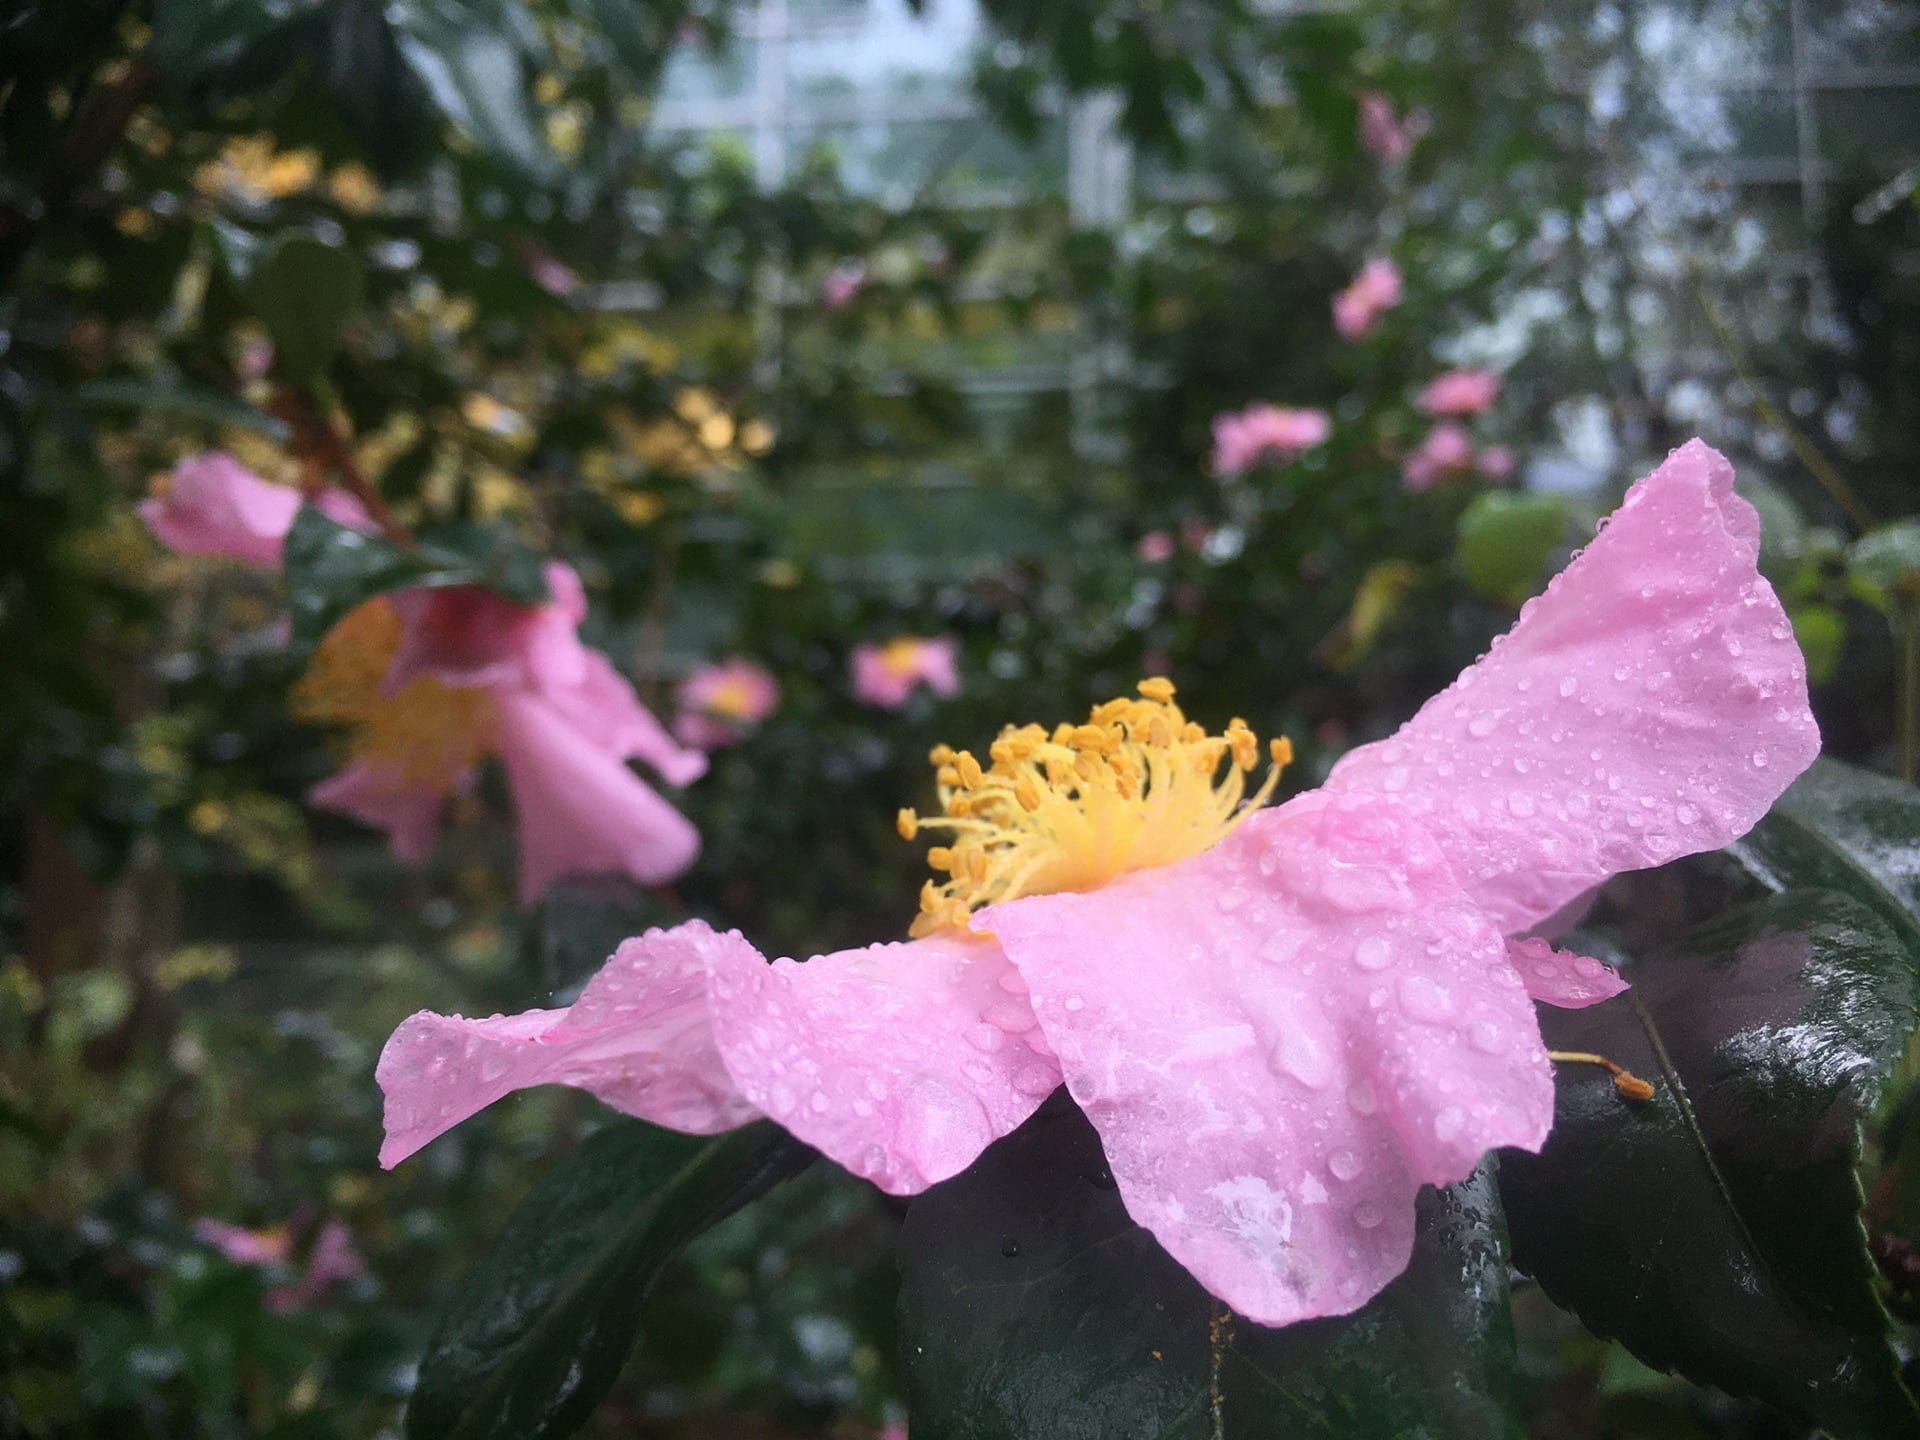 Raindrop covered flowers of Camellia sasanqua light up a gray fall day.